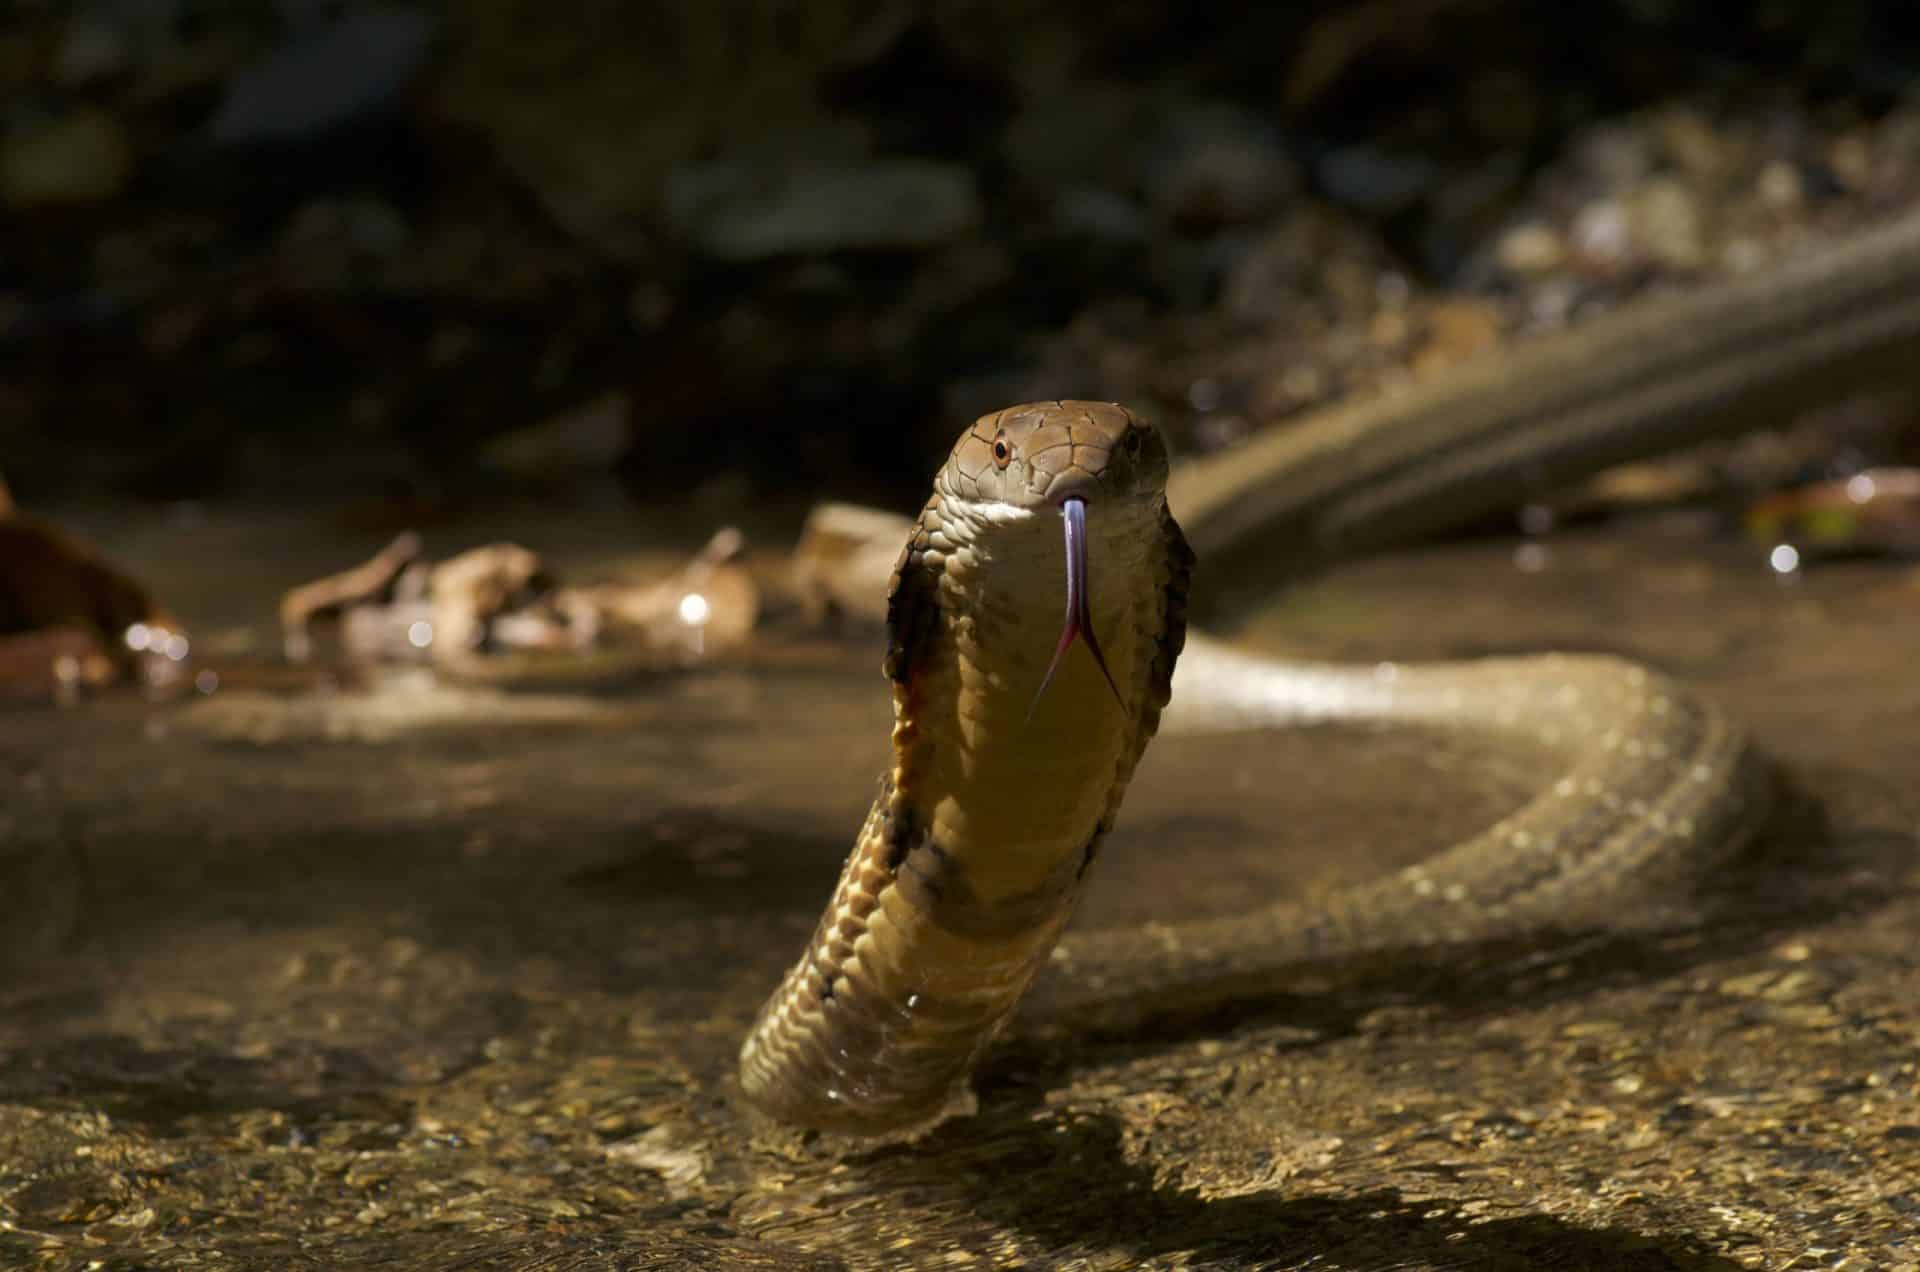 Large king cobra in a freshwater stream in southern Thailand during a herping field trip.